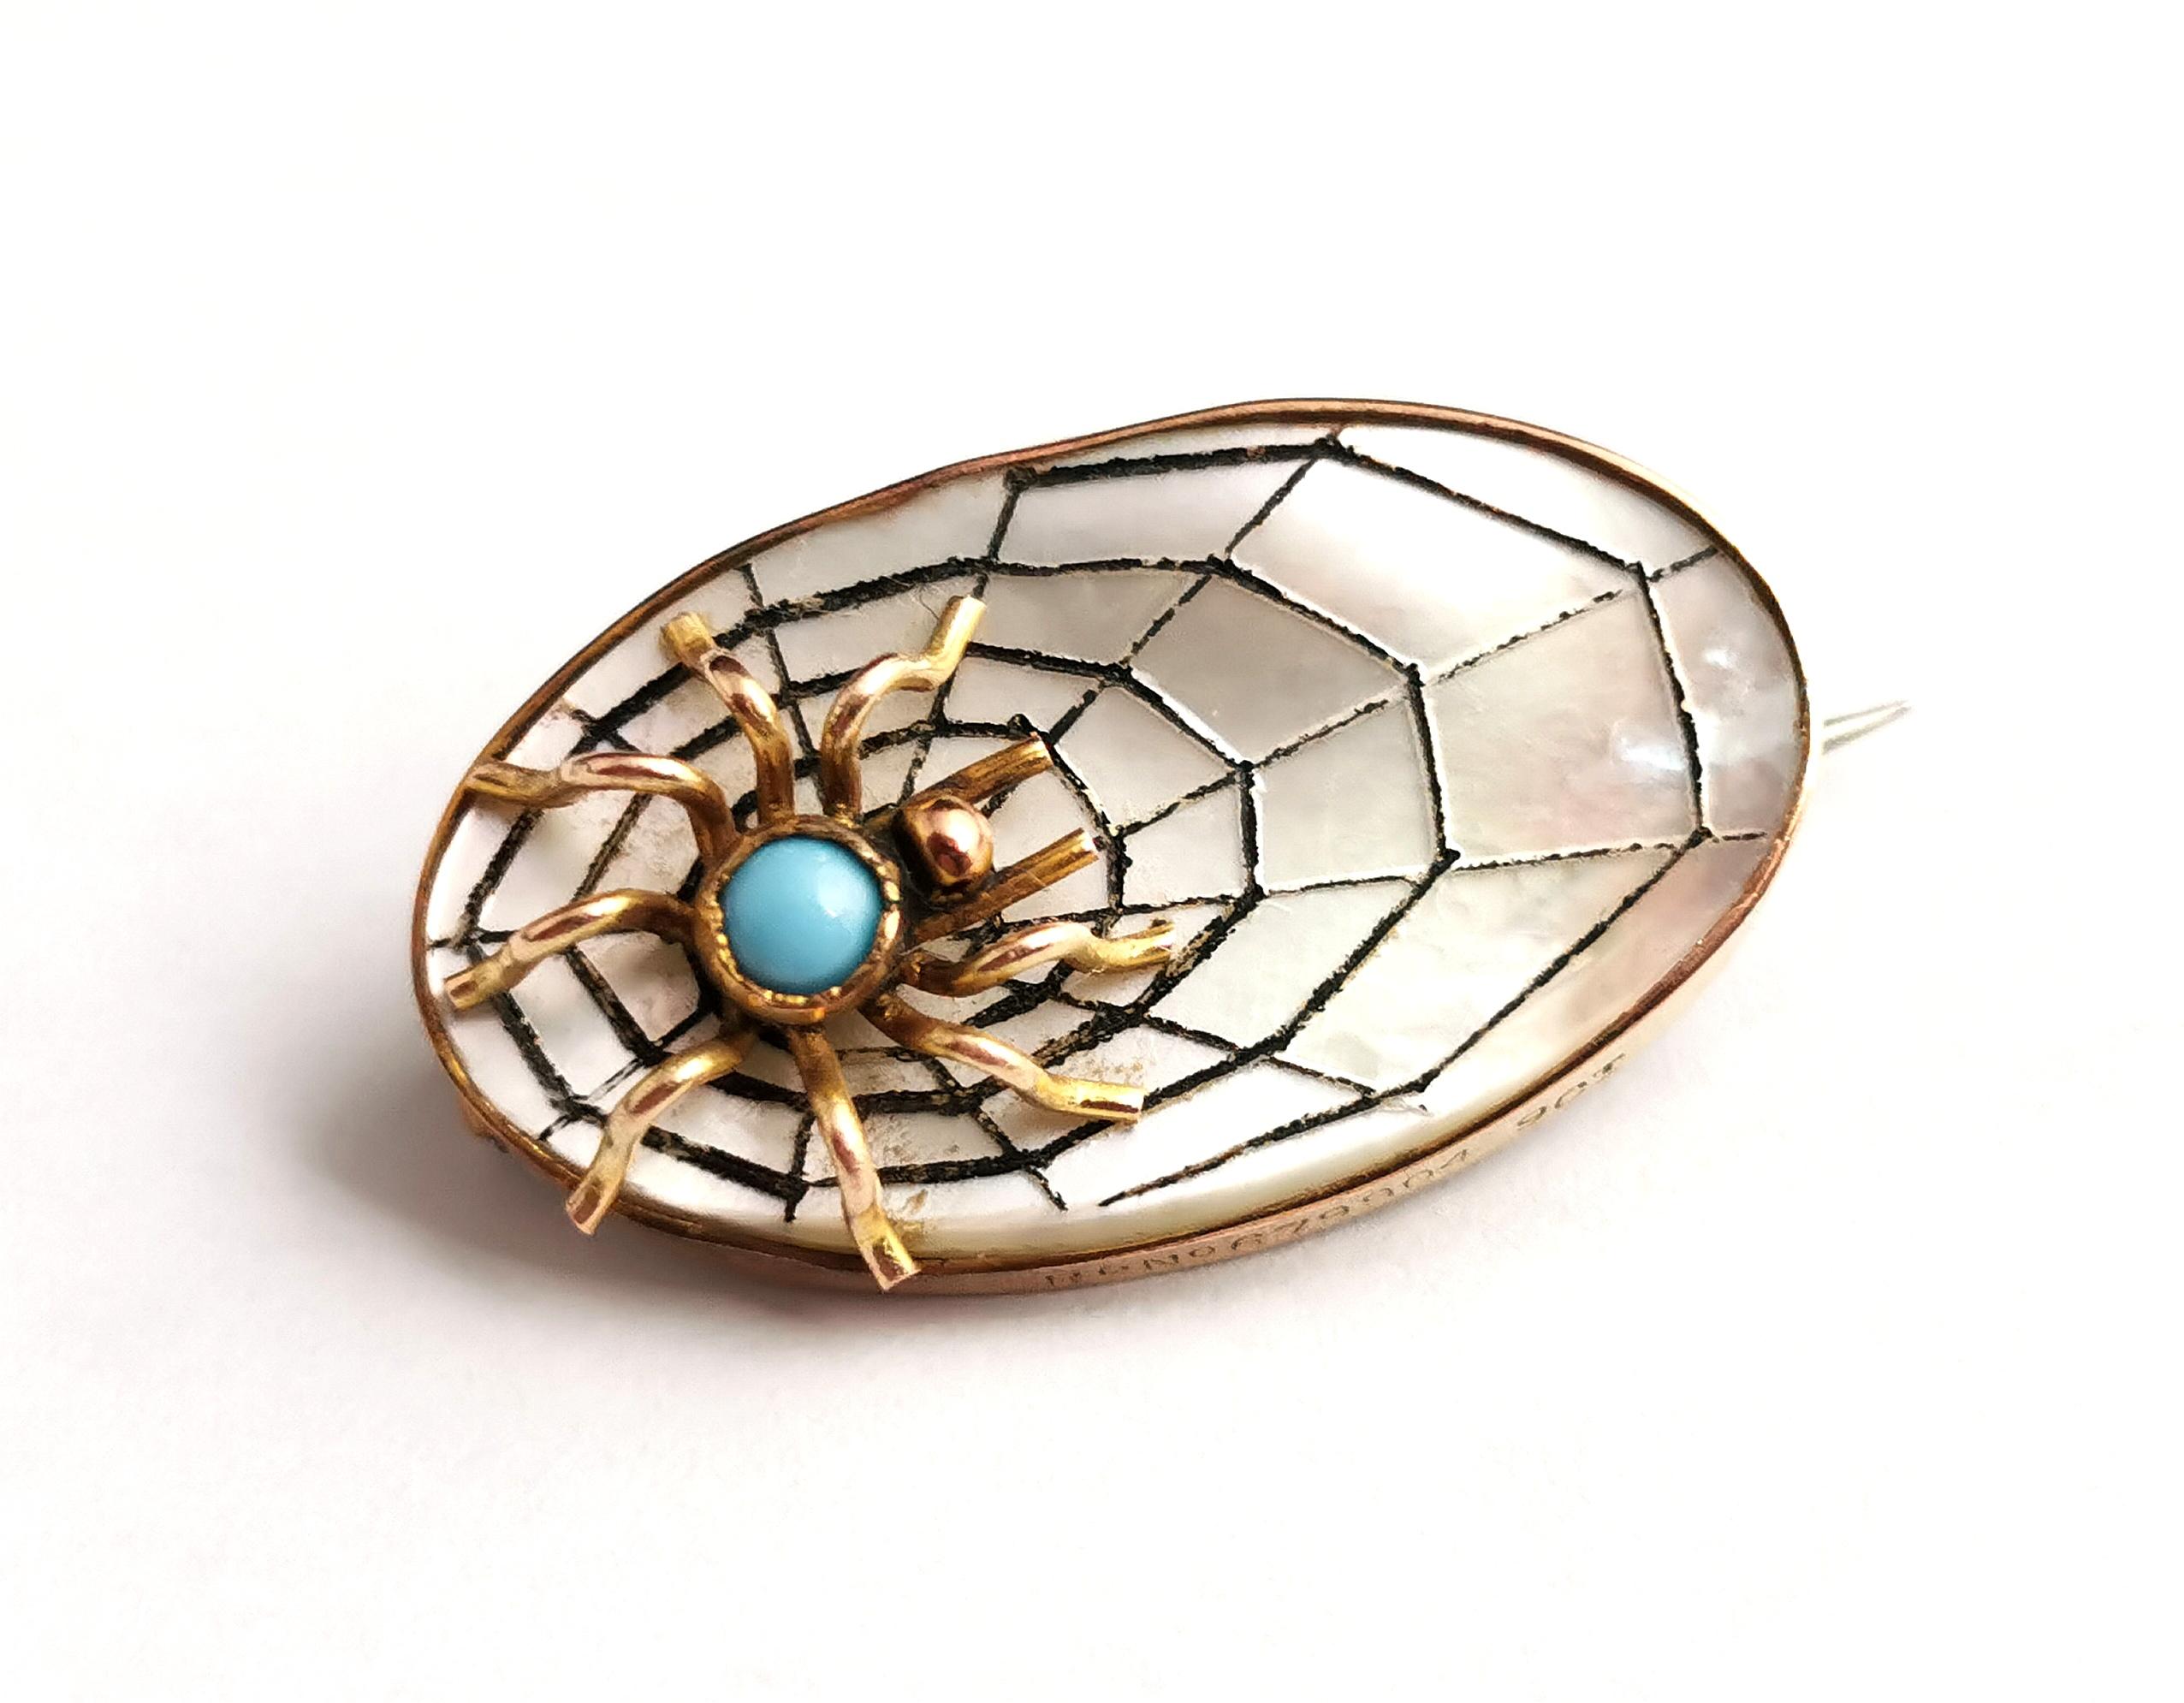 Antique Spider and Web Brooch, 9k Gold, Mother of Pearl 7